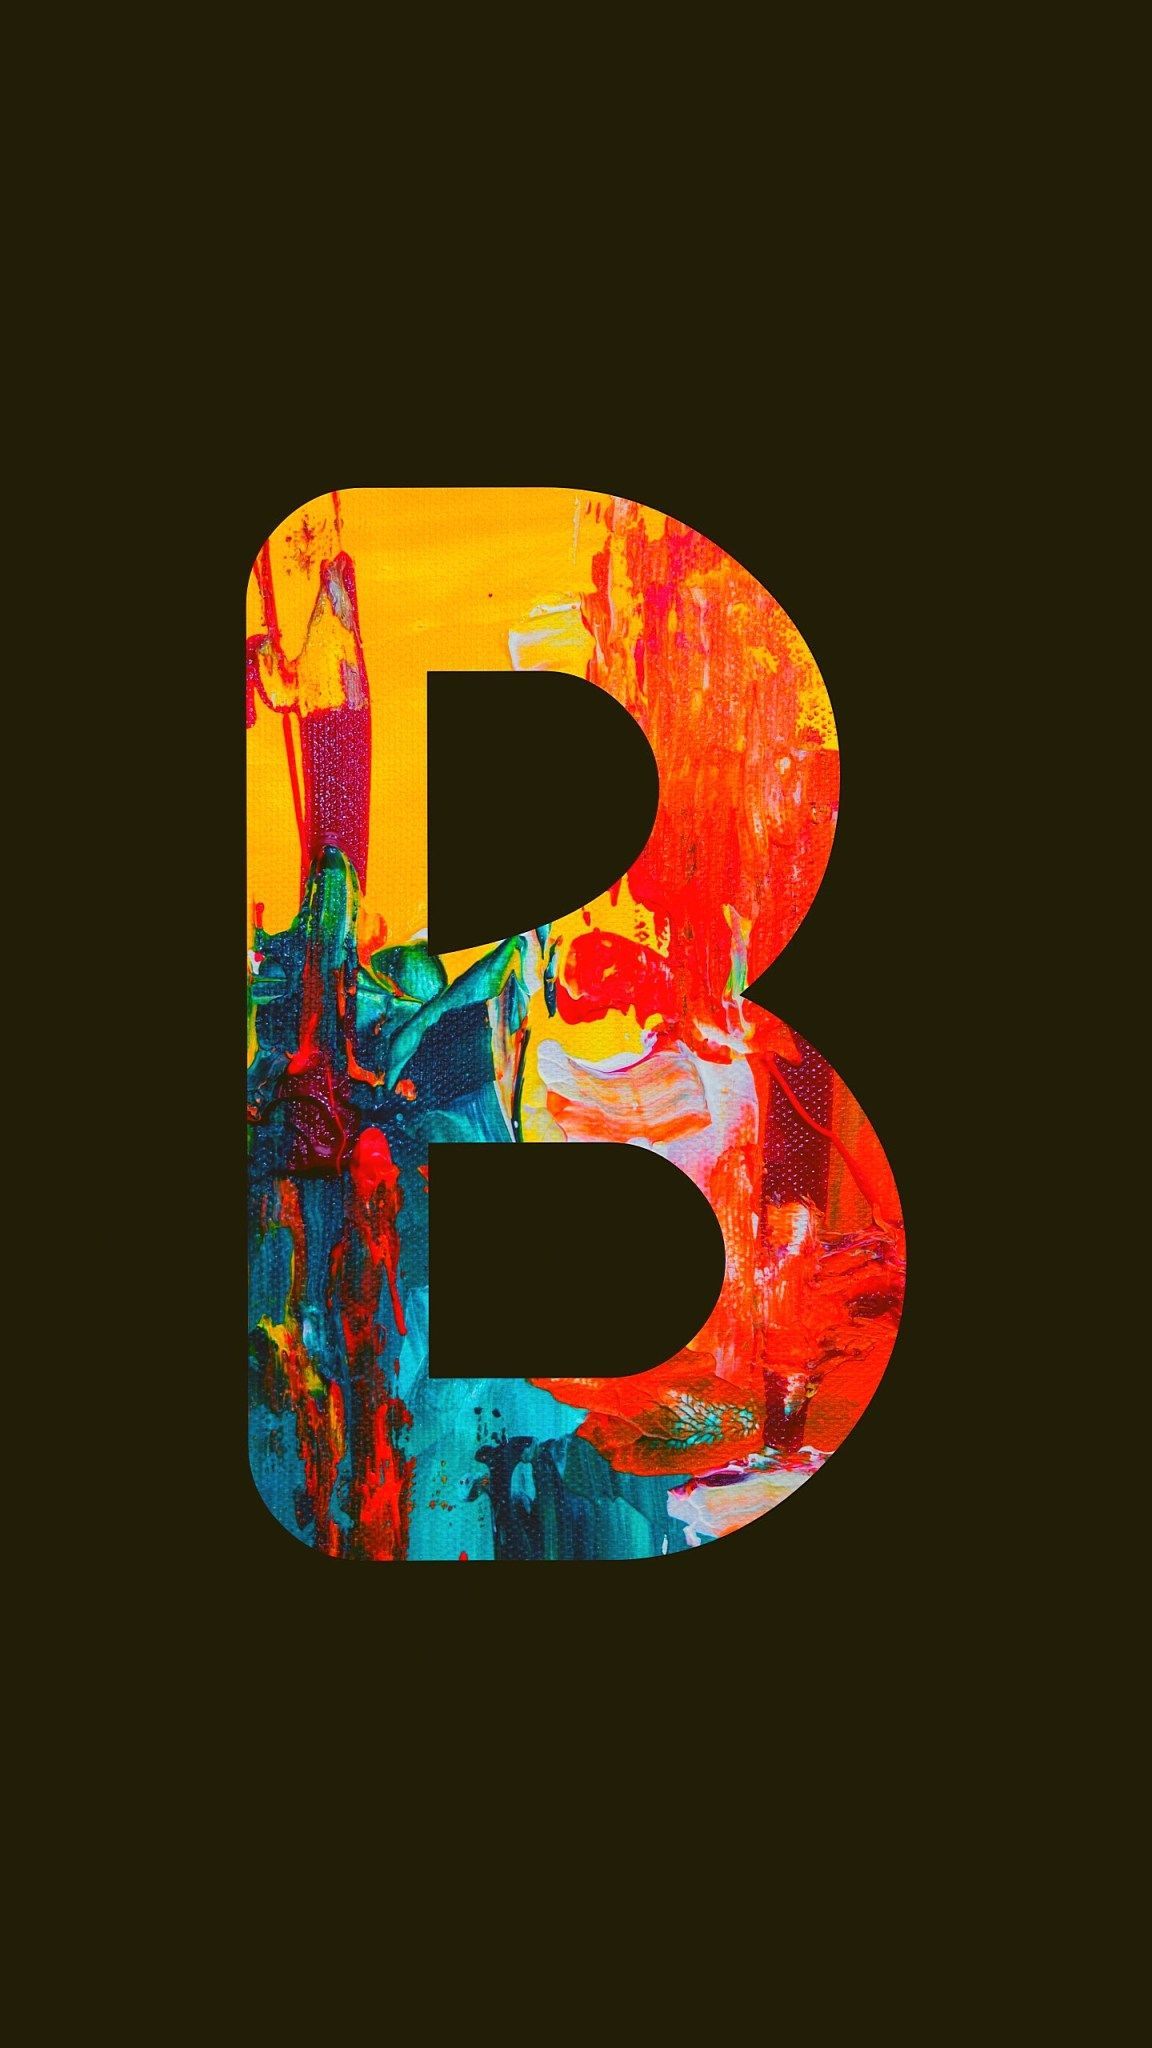 B Letter HD Wallpapers  Wallpaper Cave